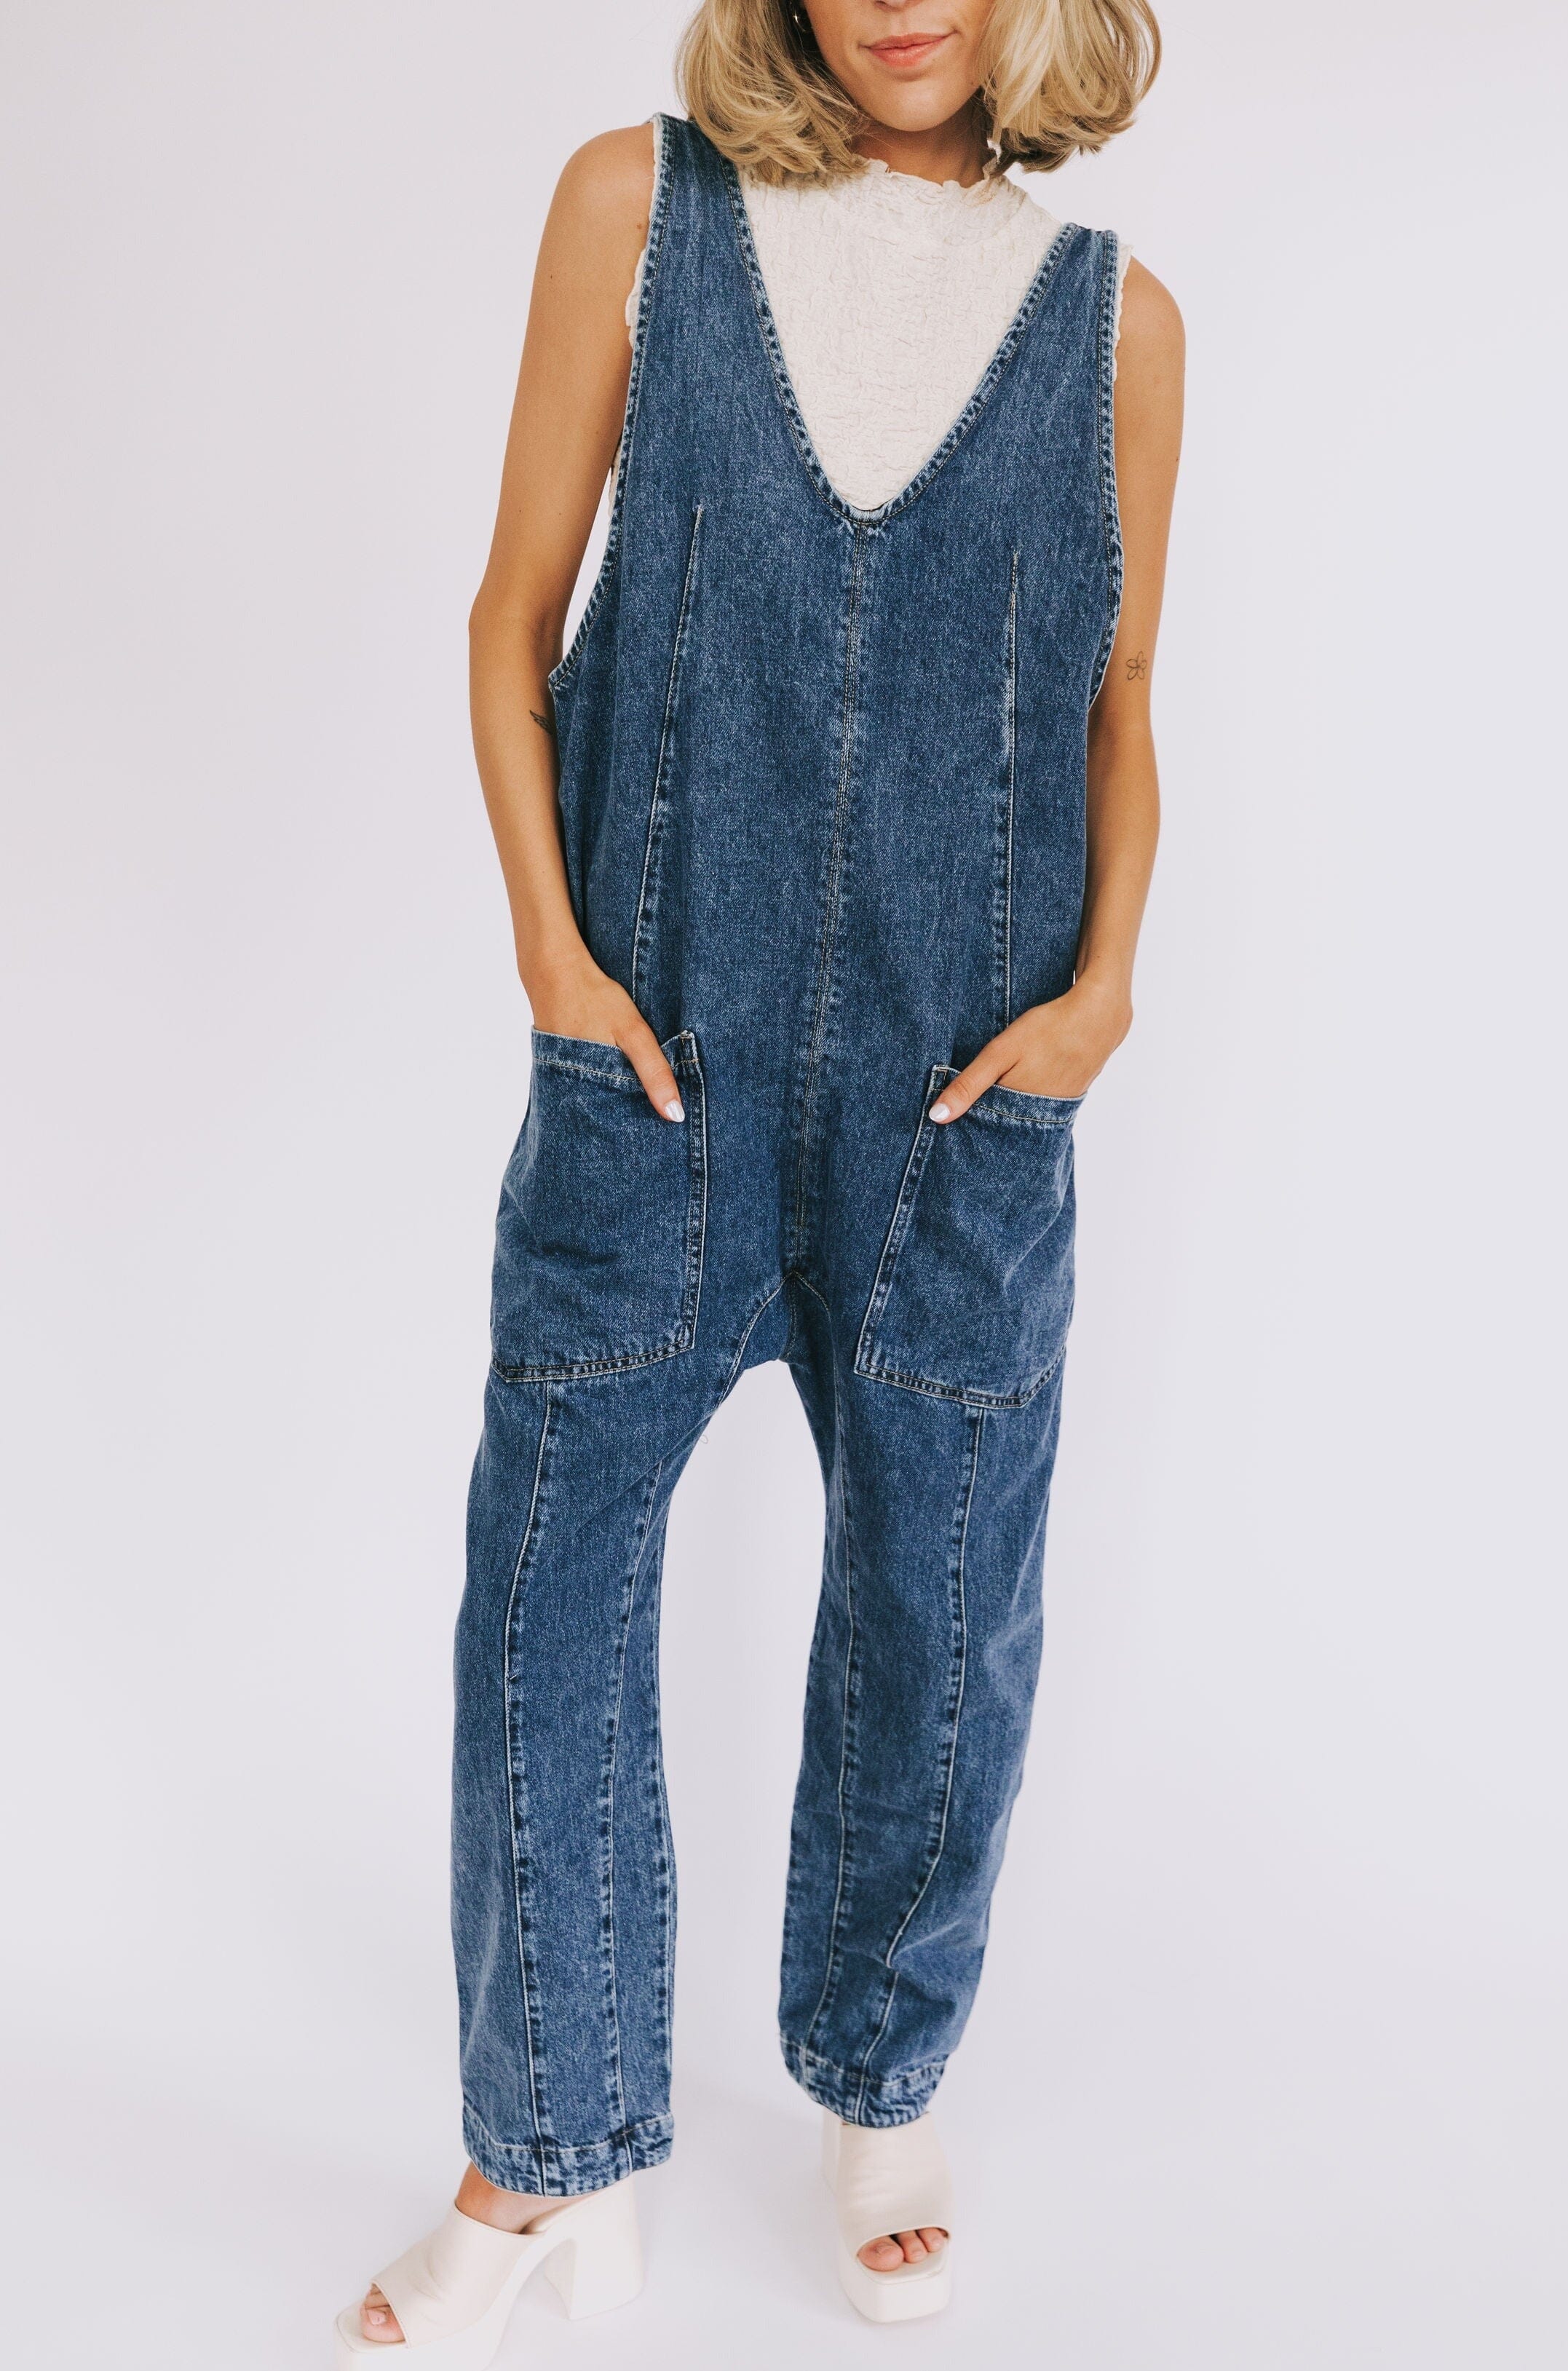 FREE PEOPLE - High Roller Jumpsuit - 3 Colors!